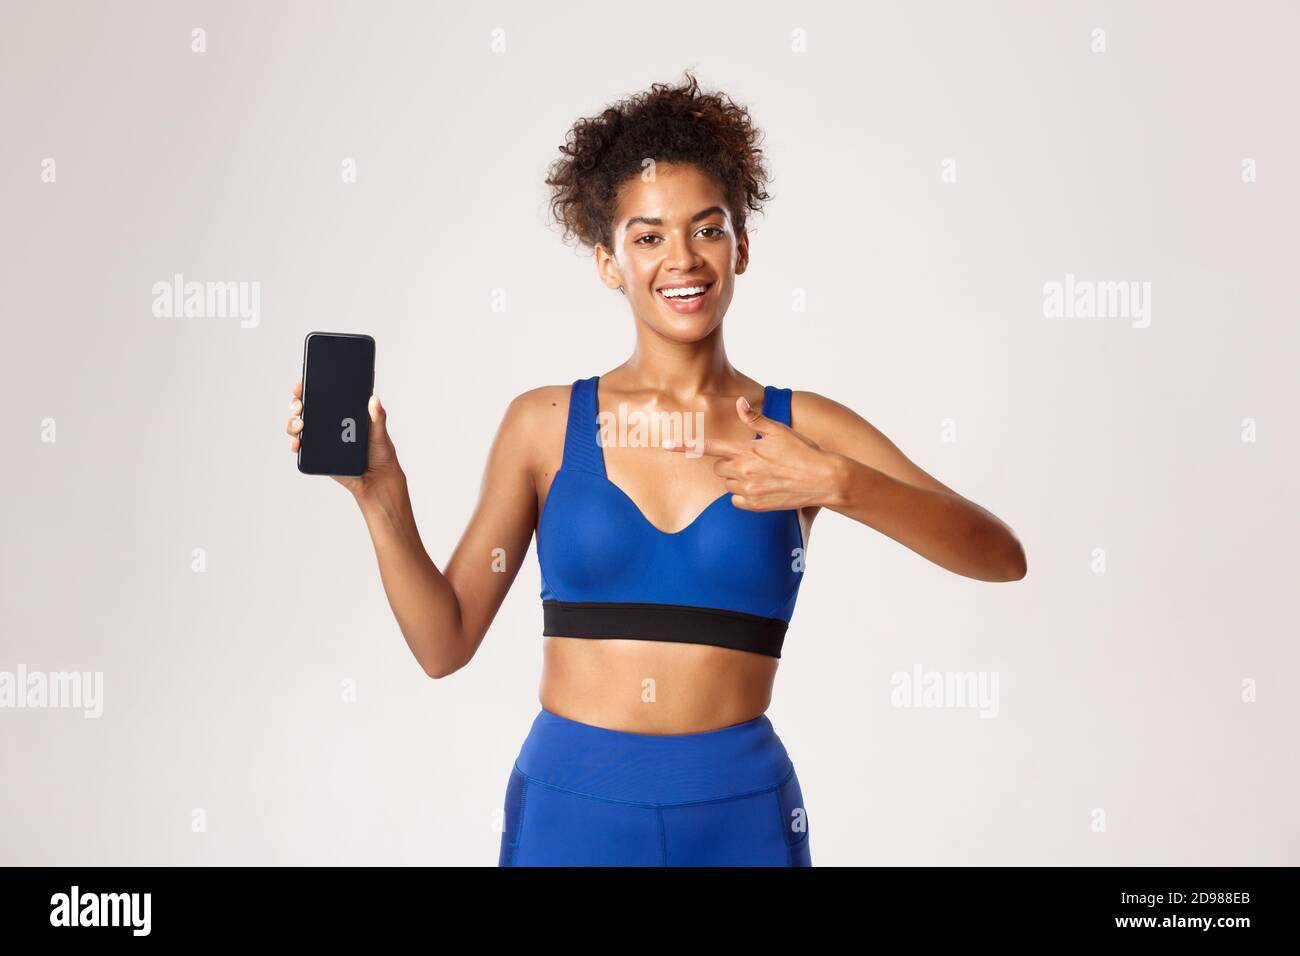 Sport and technology concept. Beautiful athletic woman in fitness clothing, pointing finger at smartphone screen, standing against white background Stock Photo